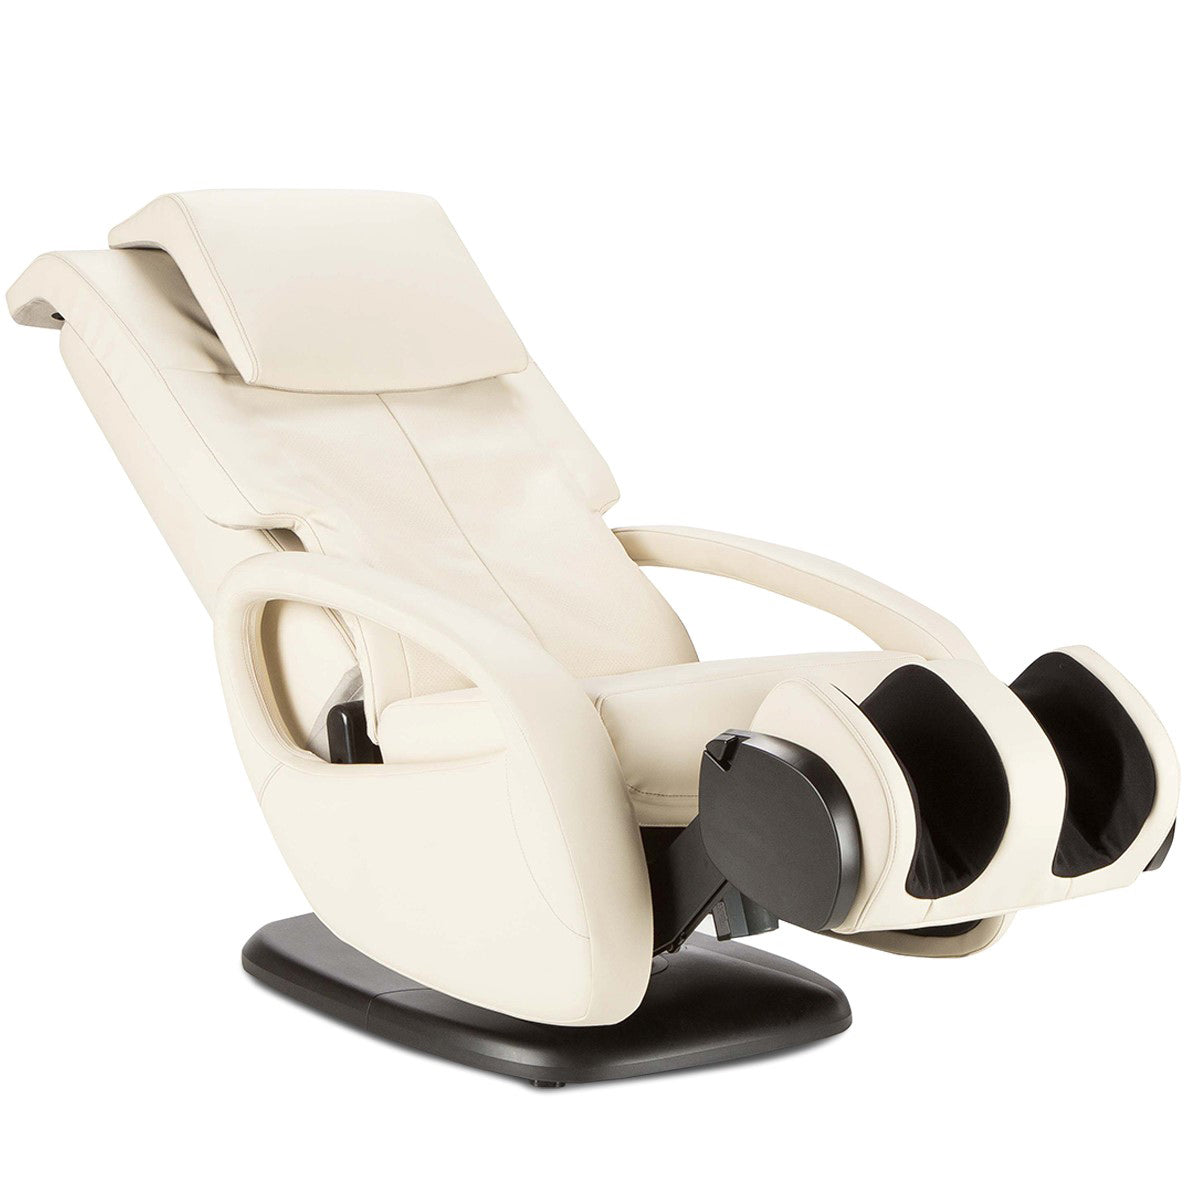 Human Touch WholeBody 5.1 Massage Chair Massage Chair Human Touch   